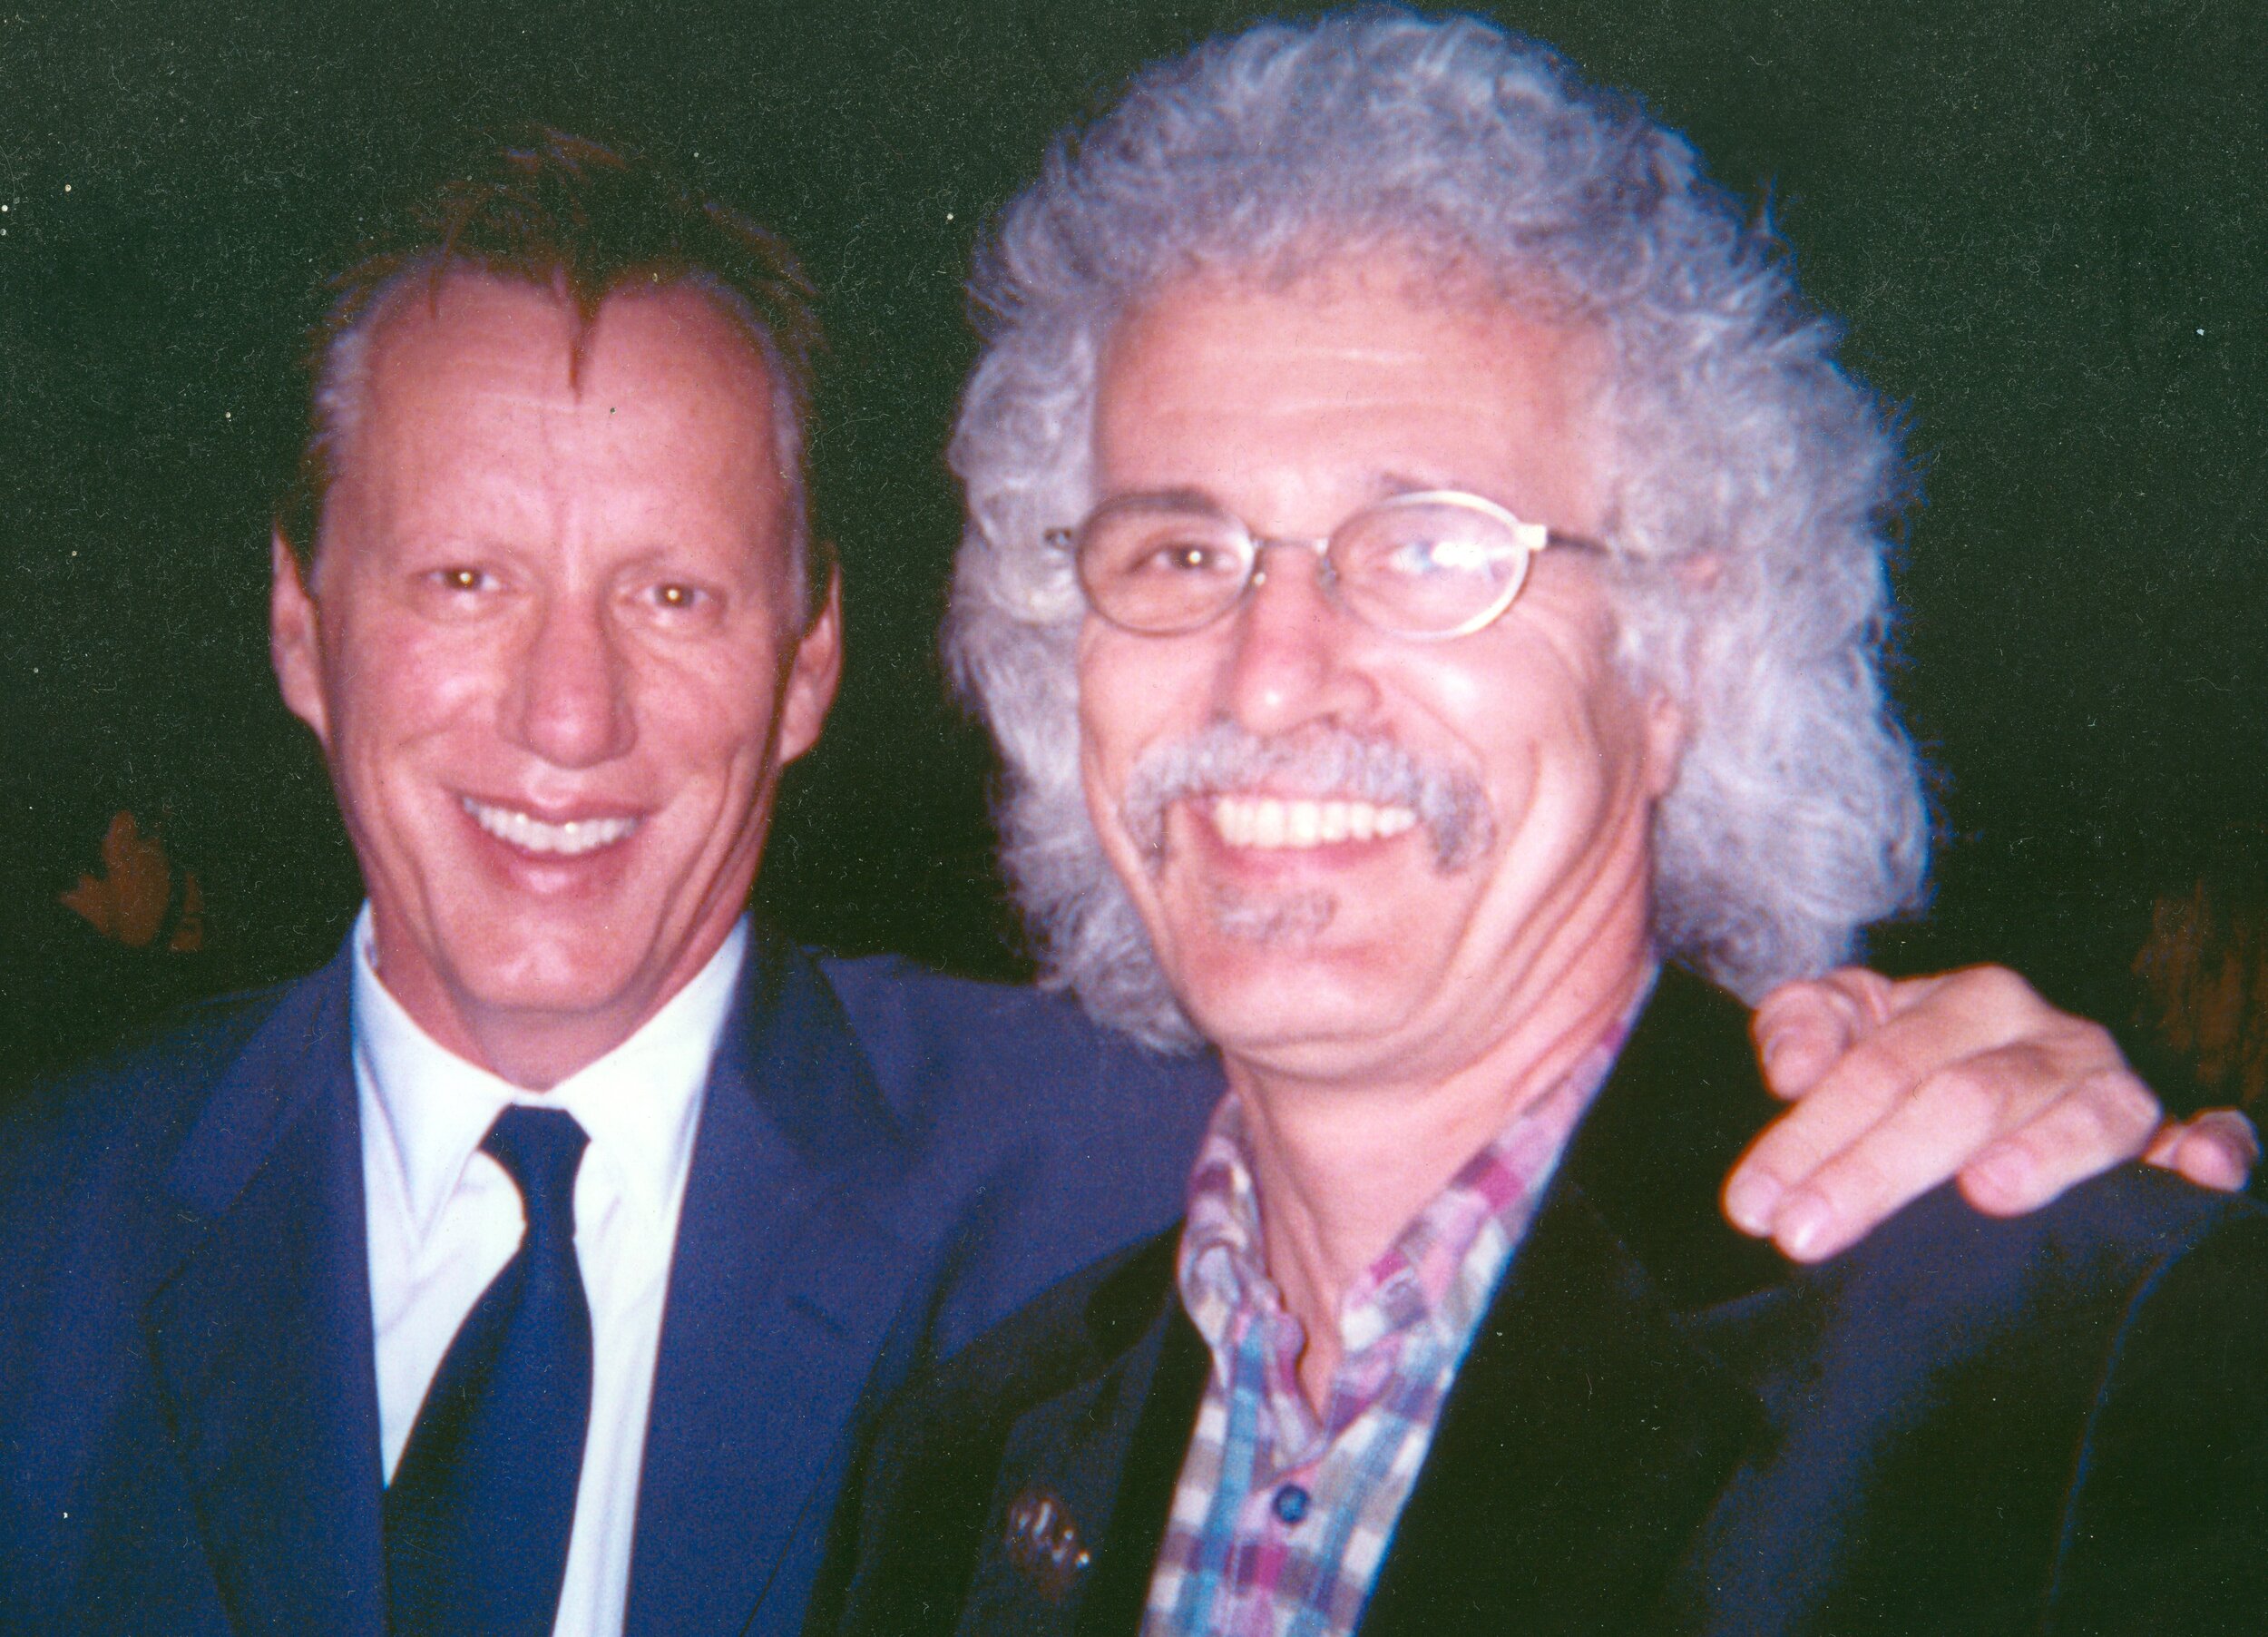 James Woods congratulating Glen for winning the Grand Prize at the San Diego Film Festival - cropped.jpg